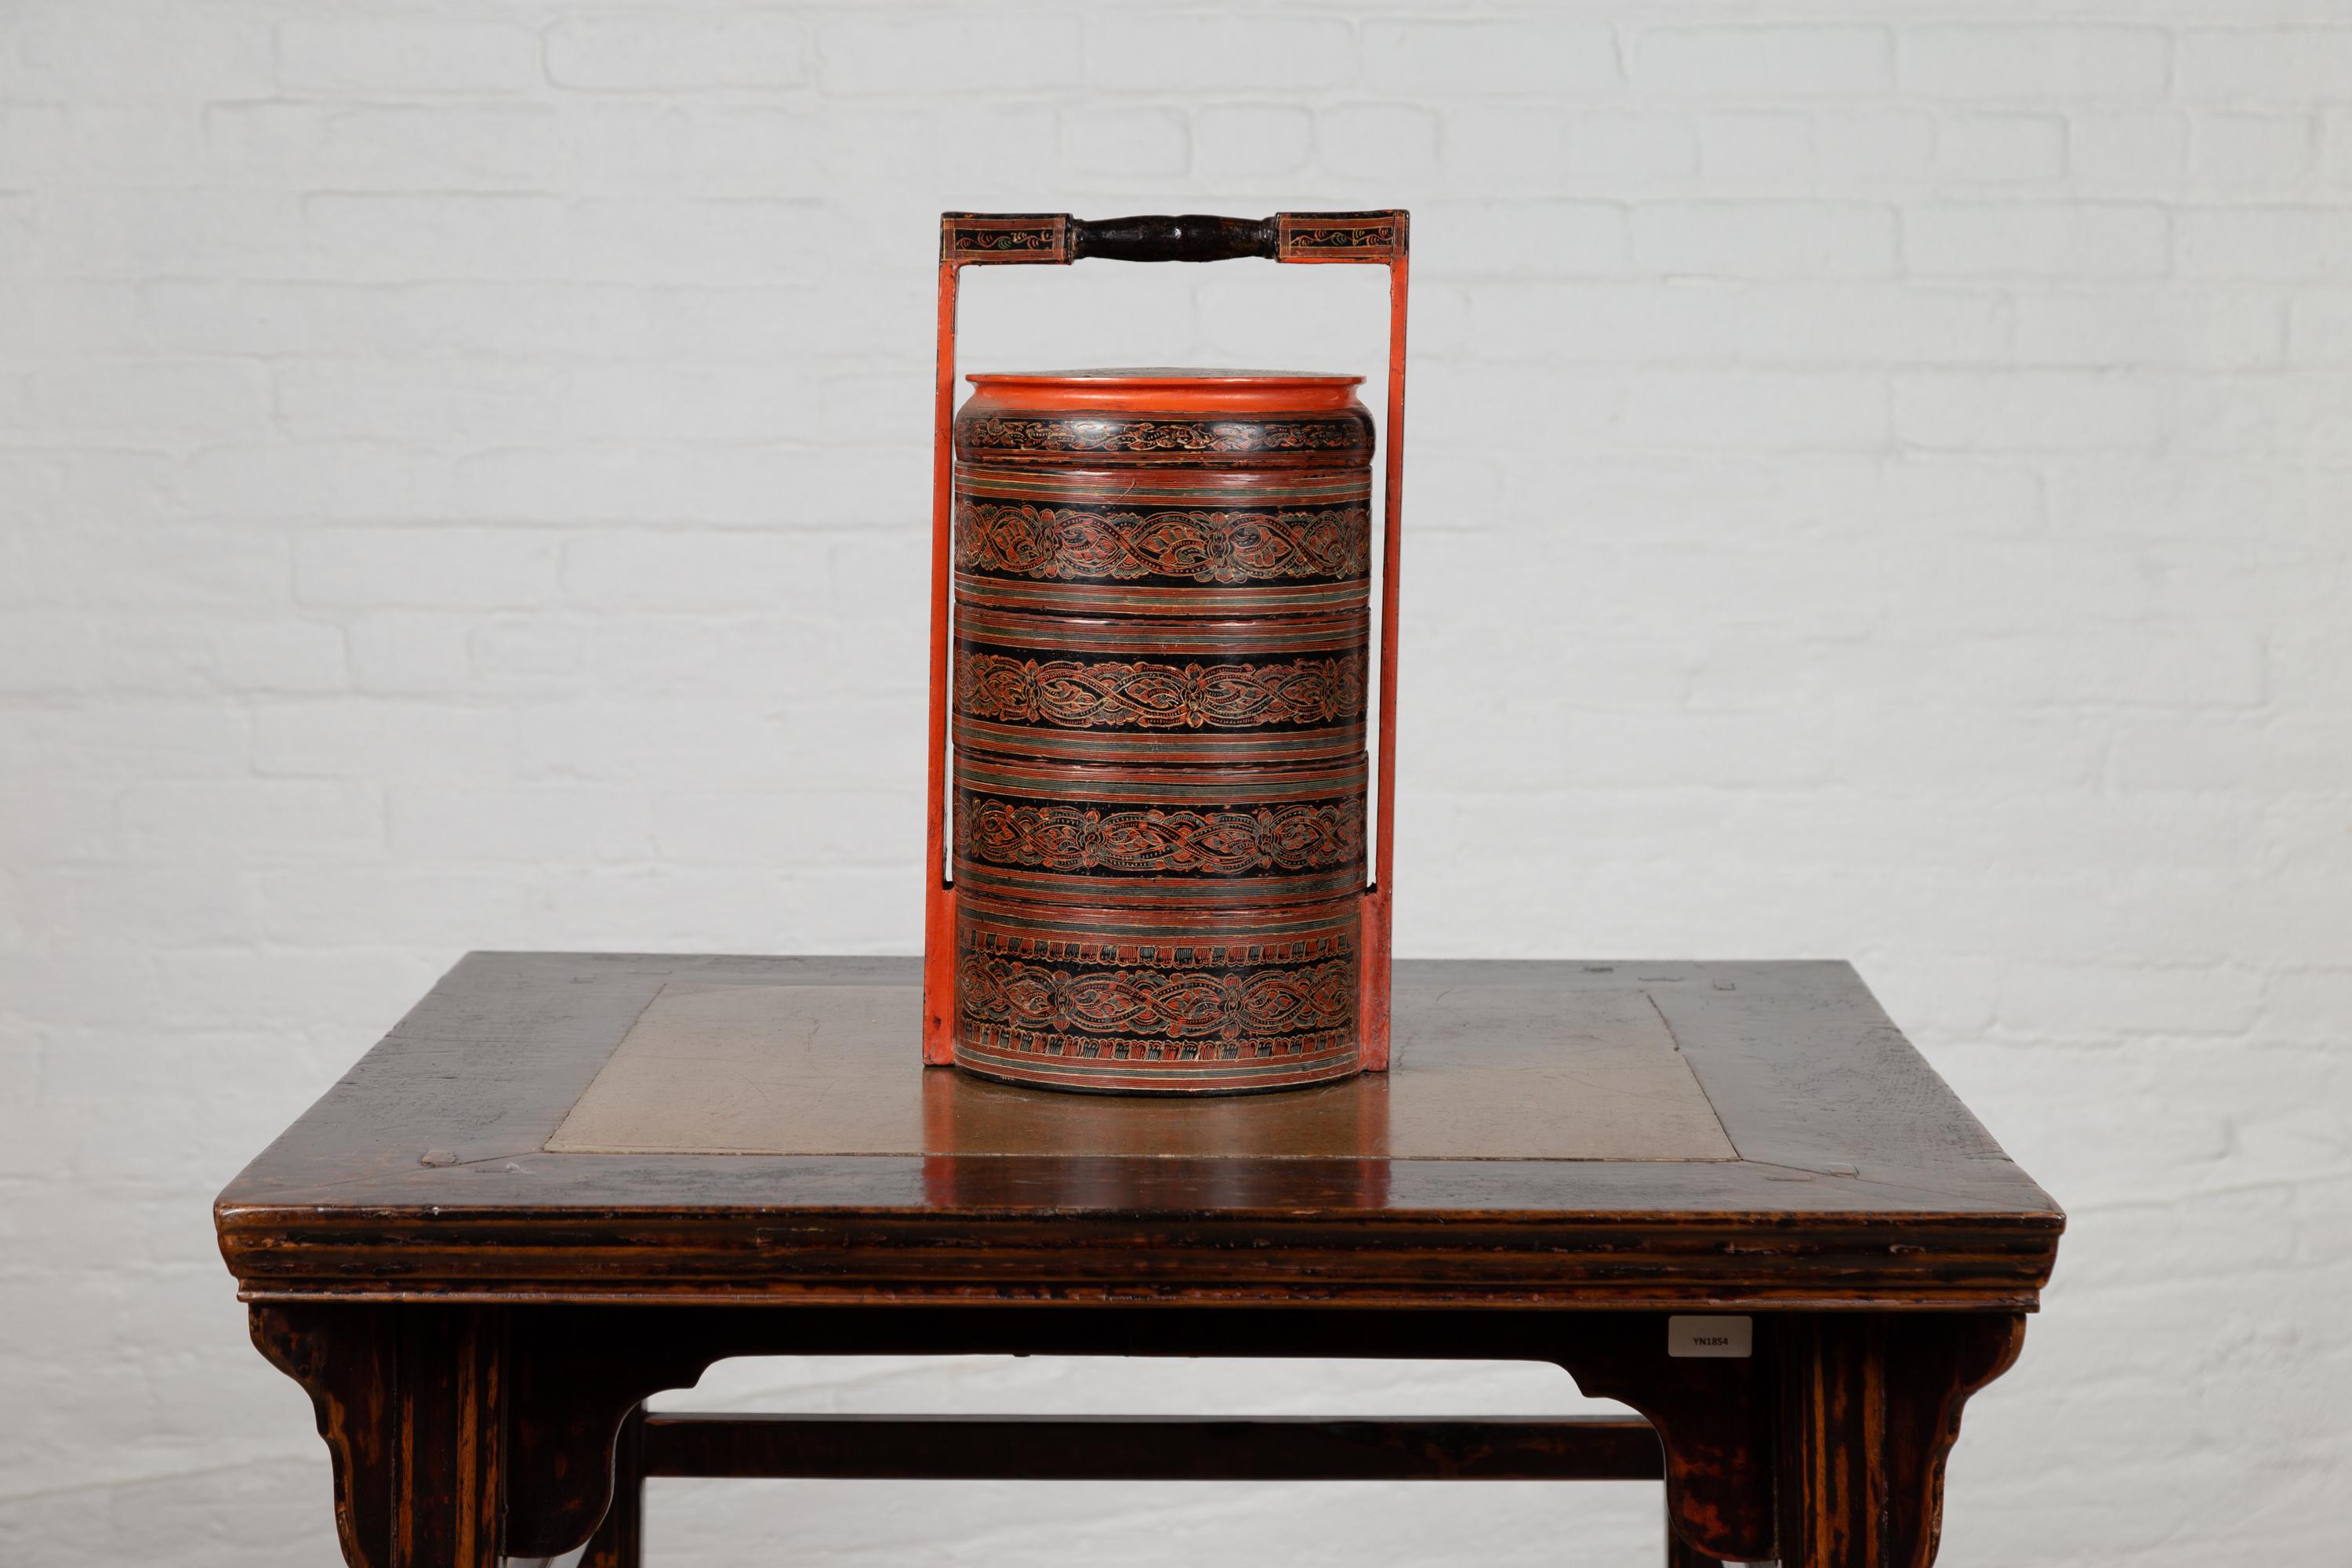 A vintage Burmese Pagan dynasty style stacking picnic cylinder basket from the mid-20th century, with multi-color underglaze decor. Born in Burma during the mid-century period, this charming stacking picnic basket features the stylistic traits of